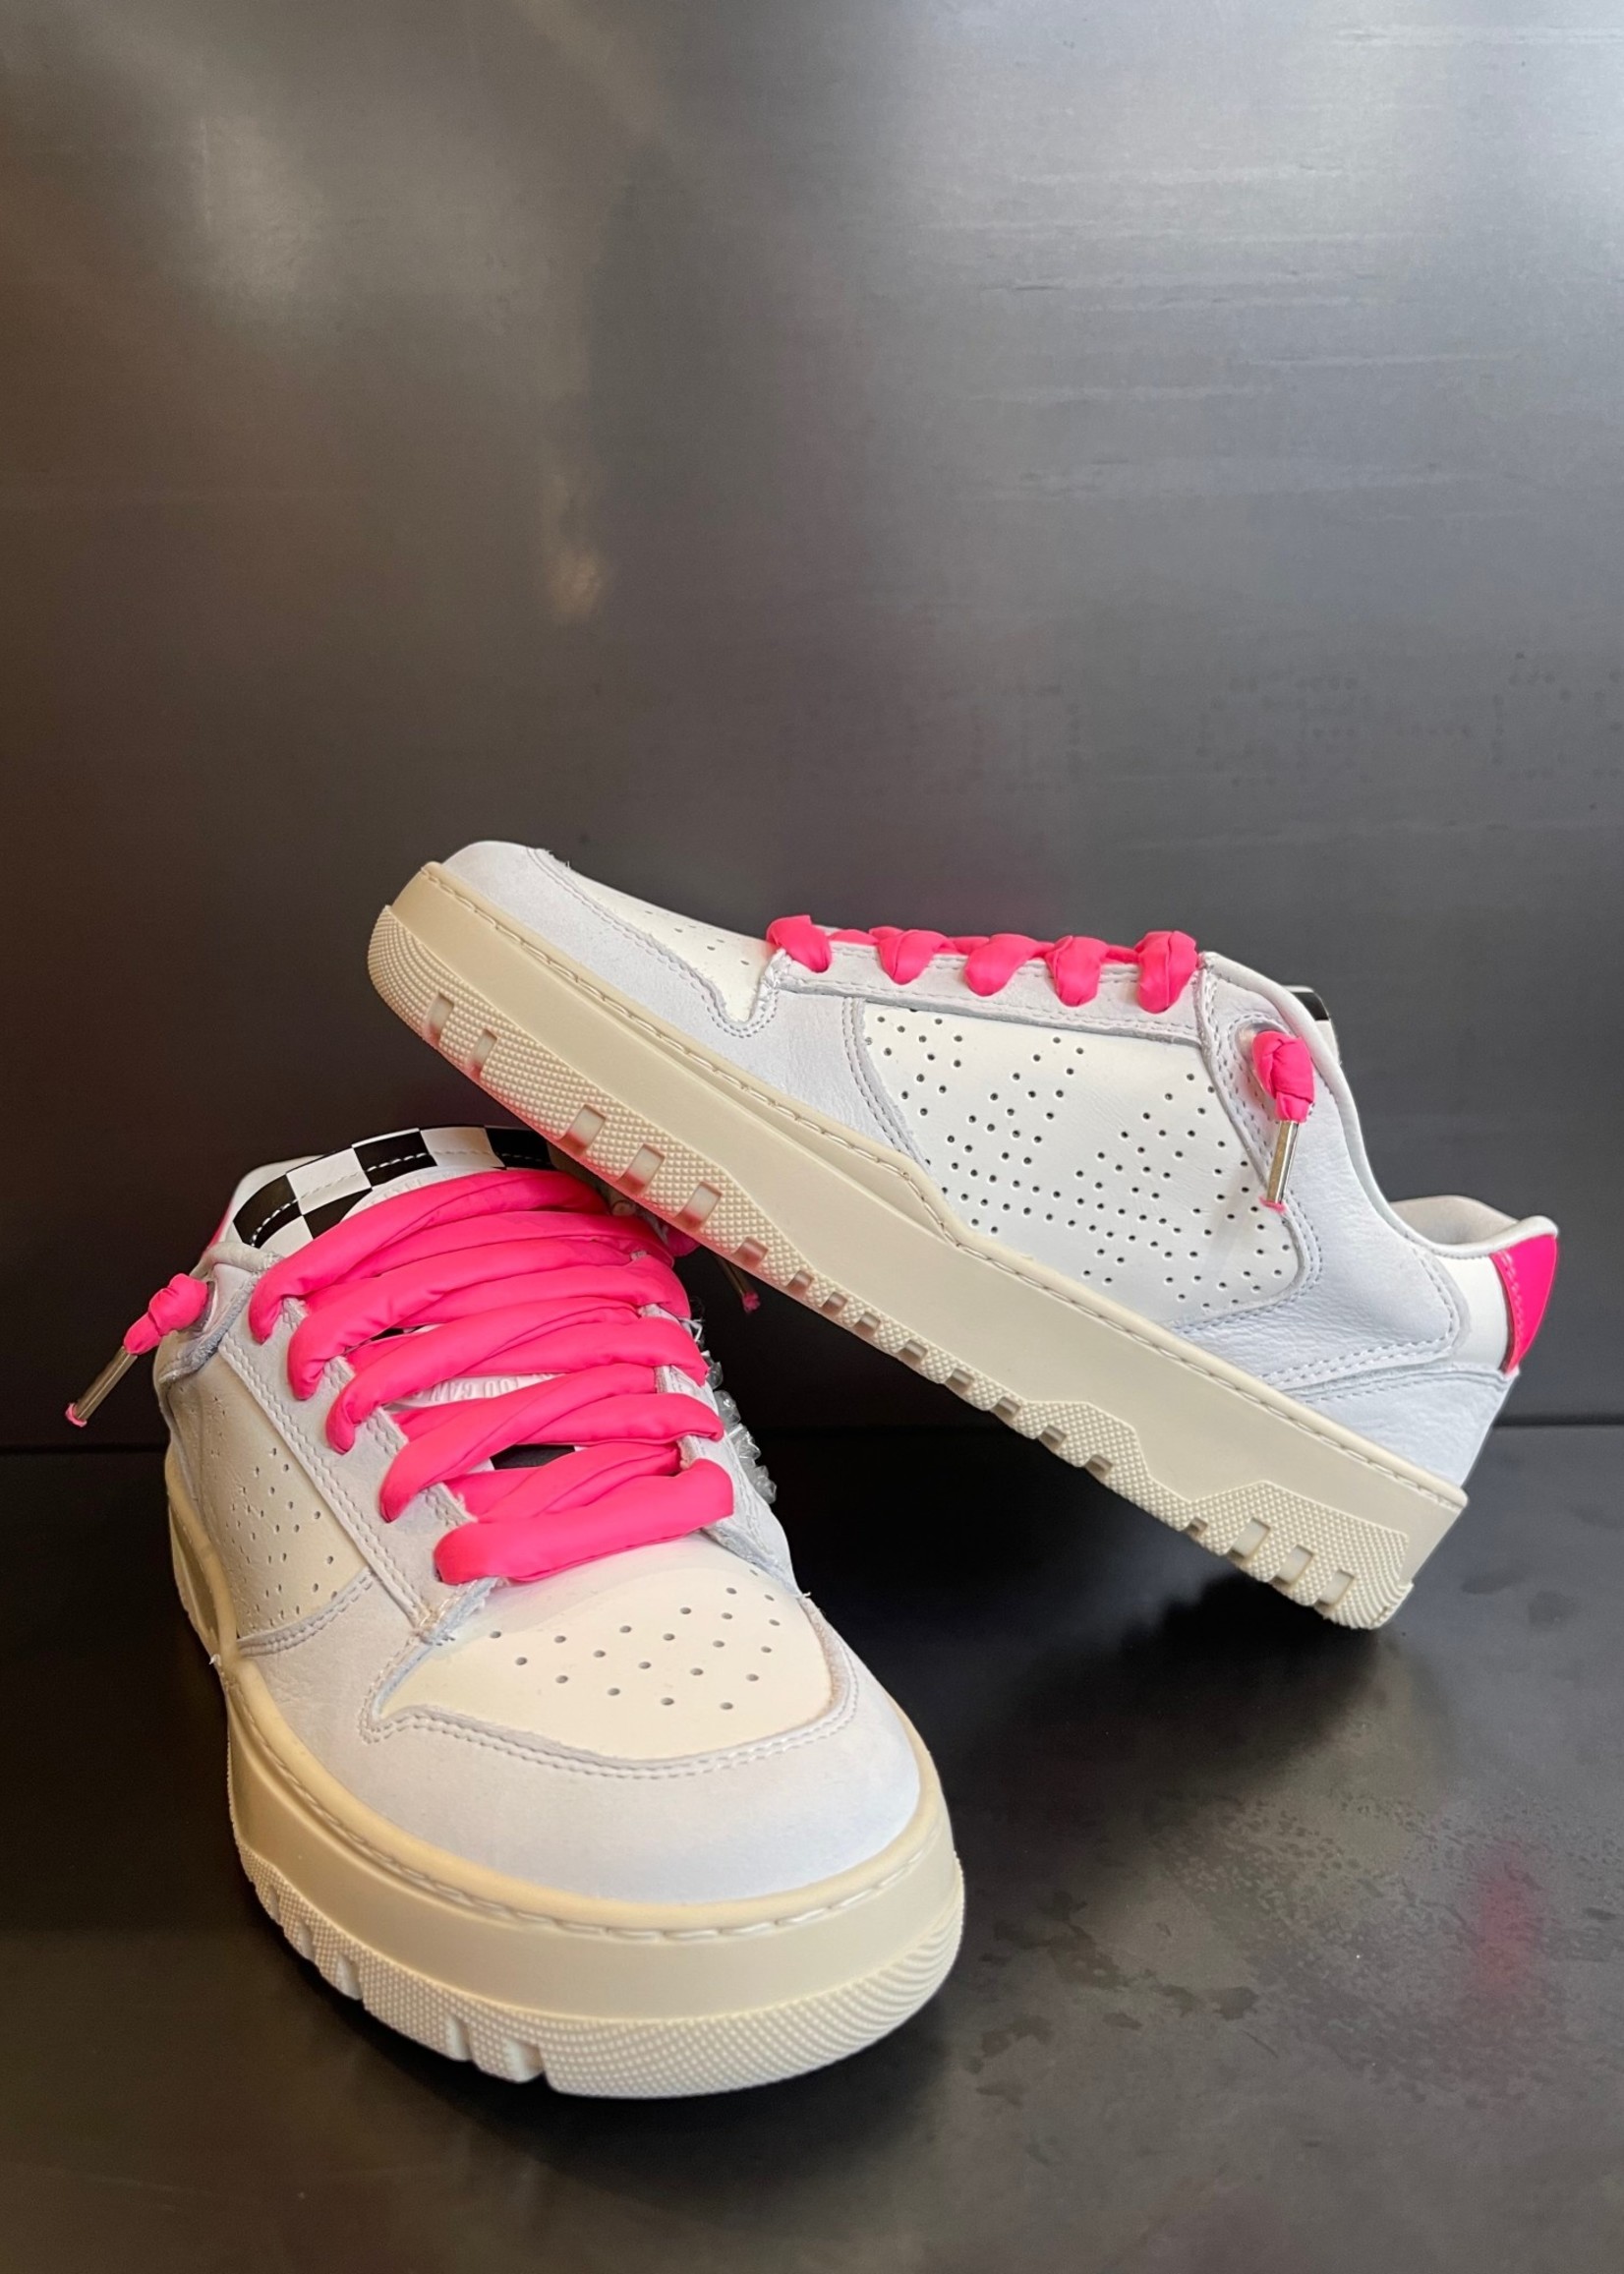 P448 Sneakers - Thea Sneaker in Unicorn - Womens Footwear - New arrivals  just in Made in Italy Leather Luxury Shoes – Secret Girl Stuff